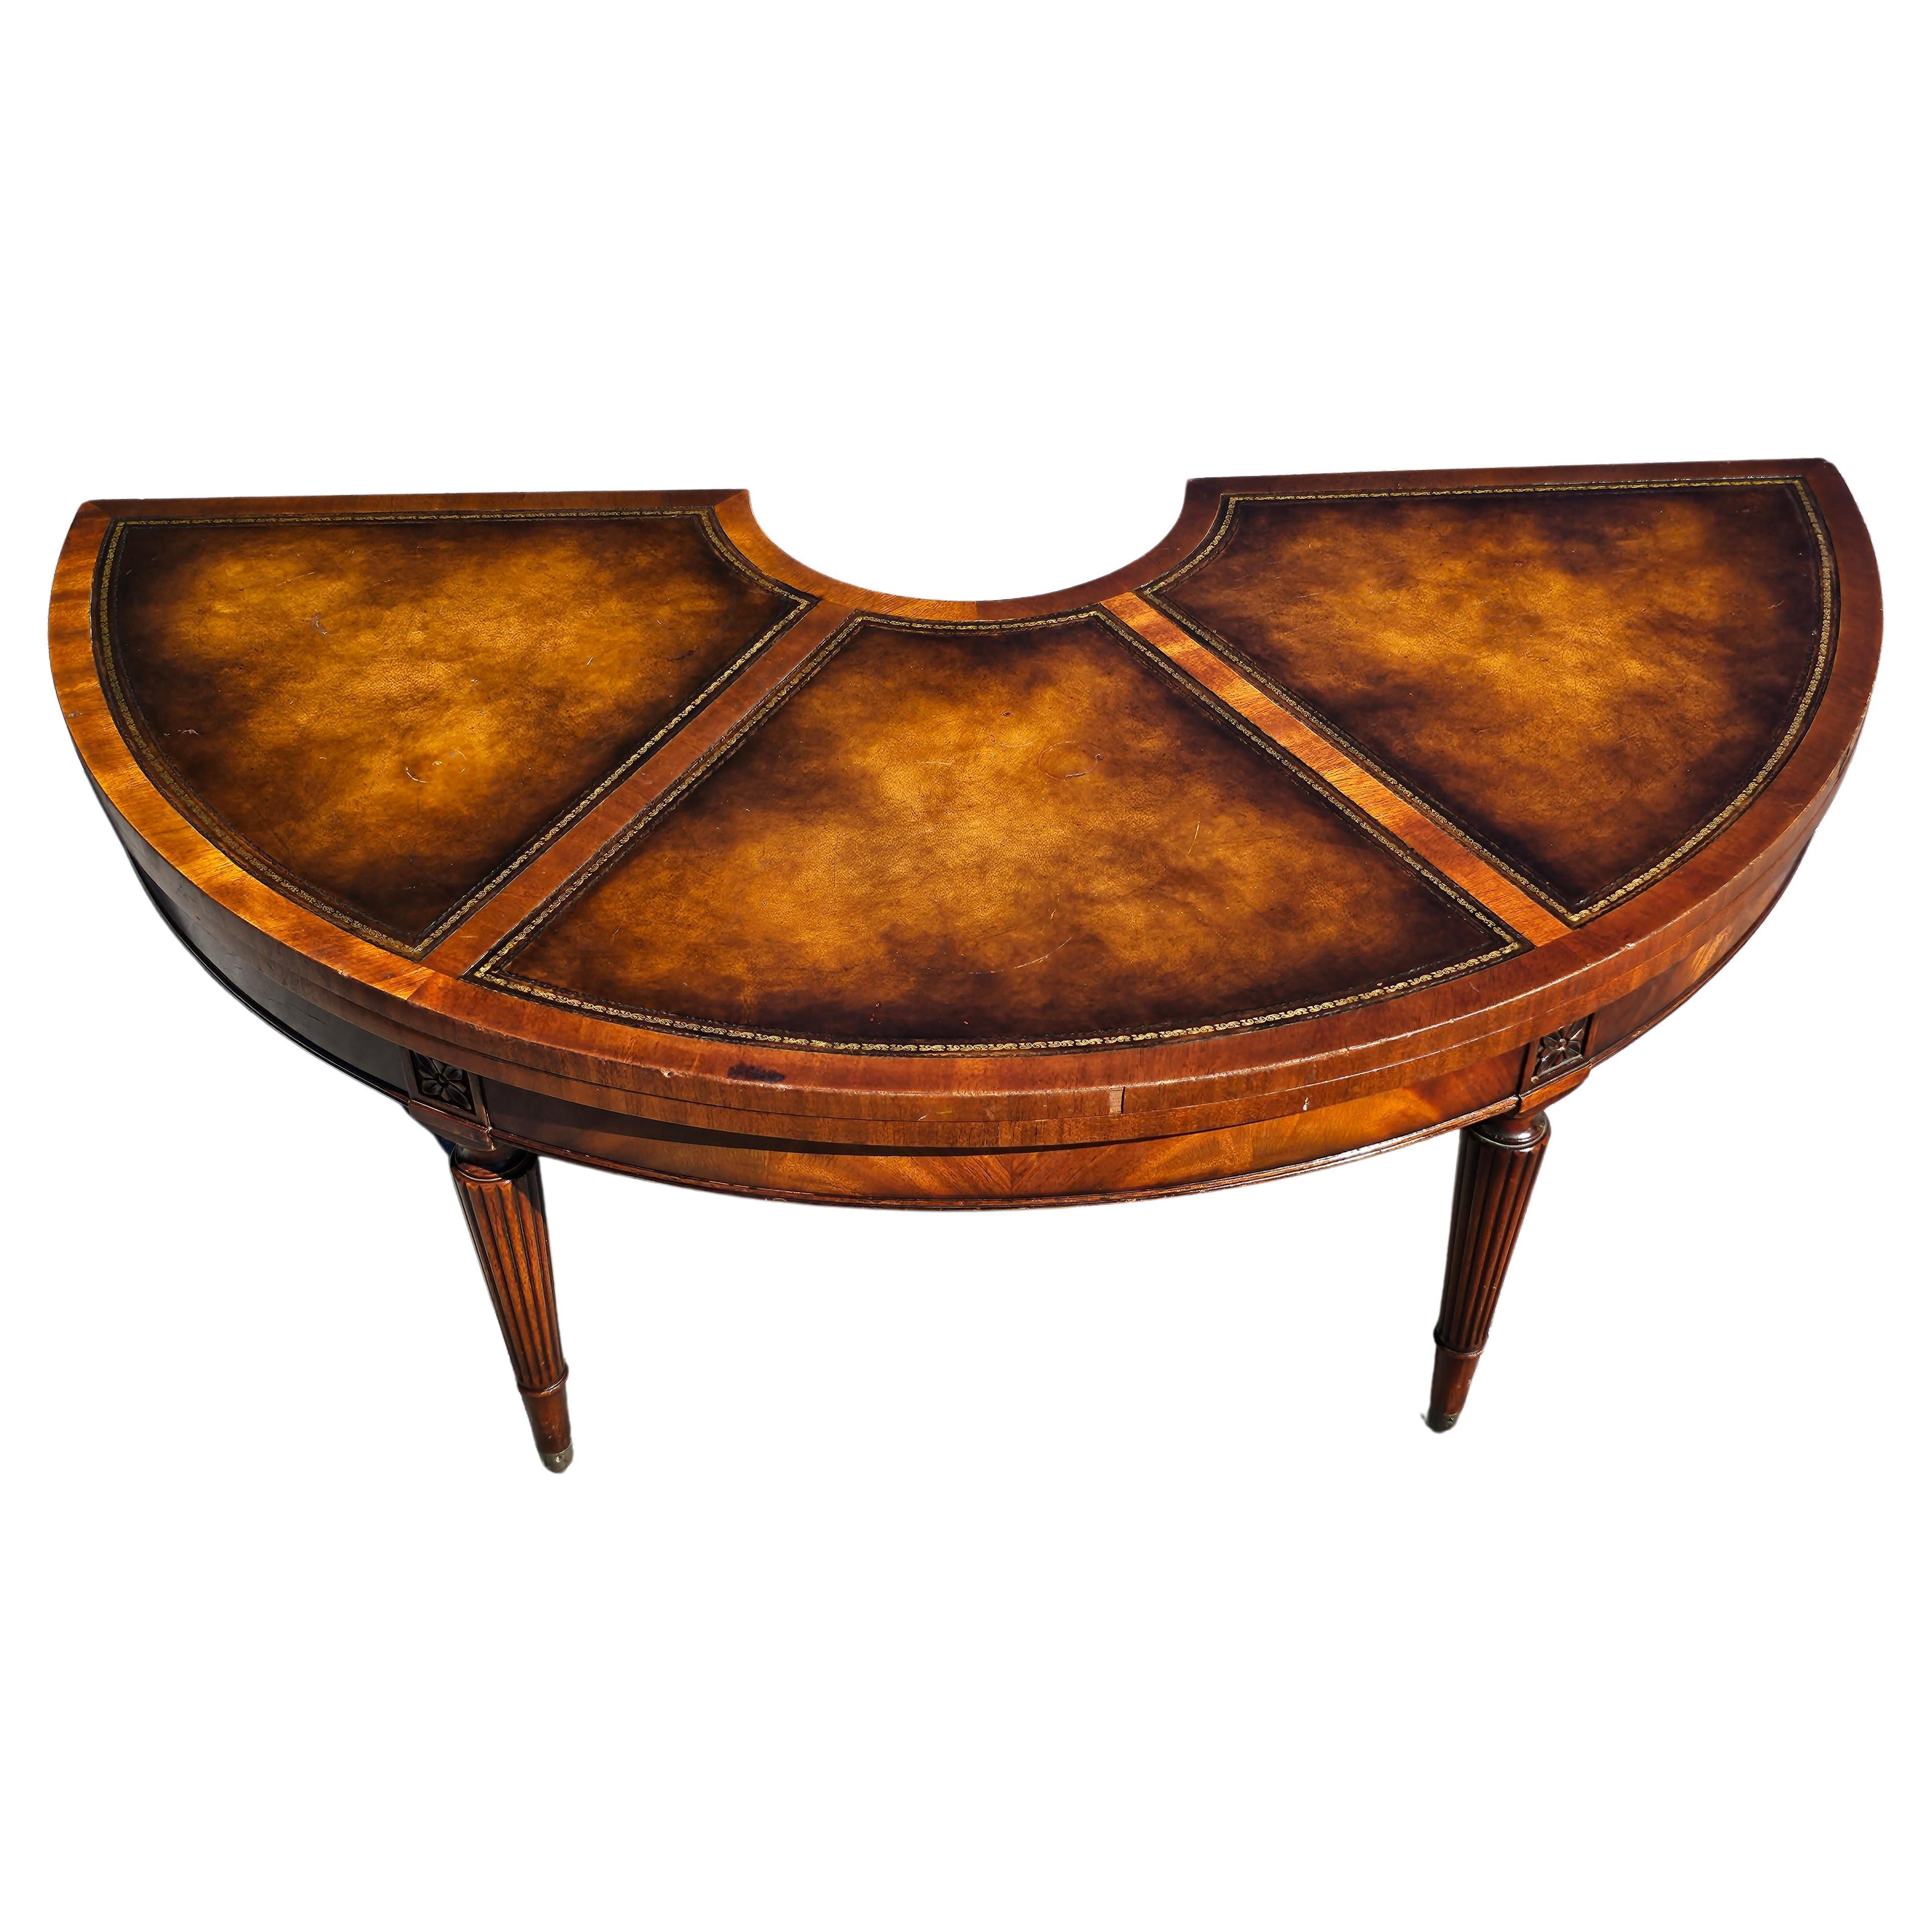 20th Century 1940s Weiman Regency Tooled Leather Mahogany Convertible Demilune Cocktail Table For Sale